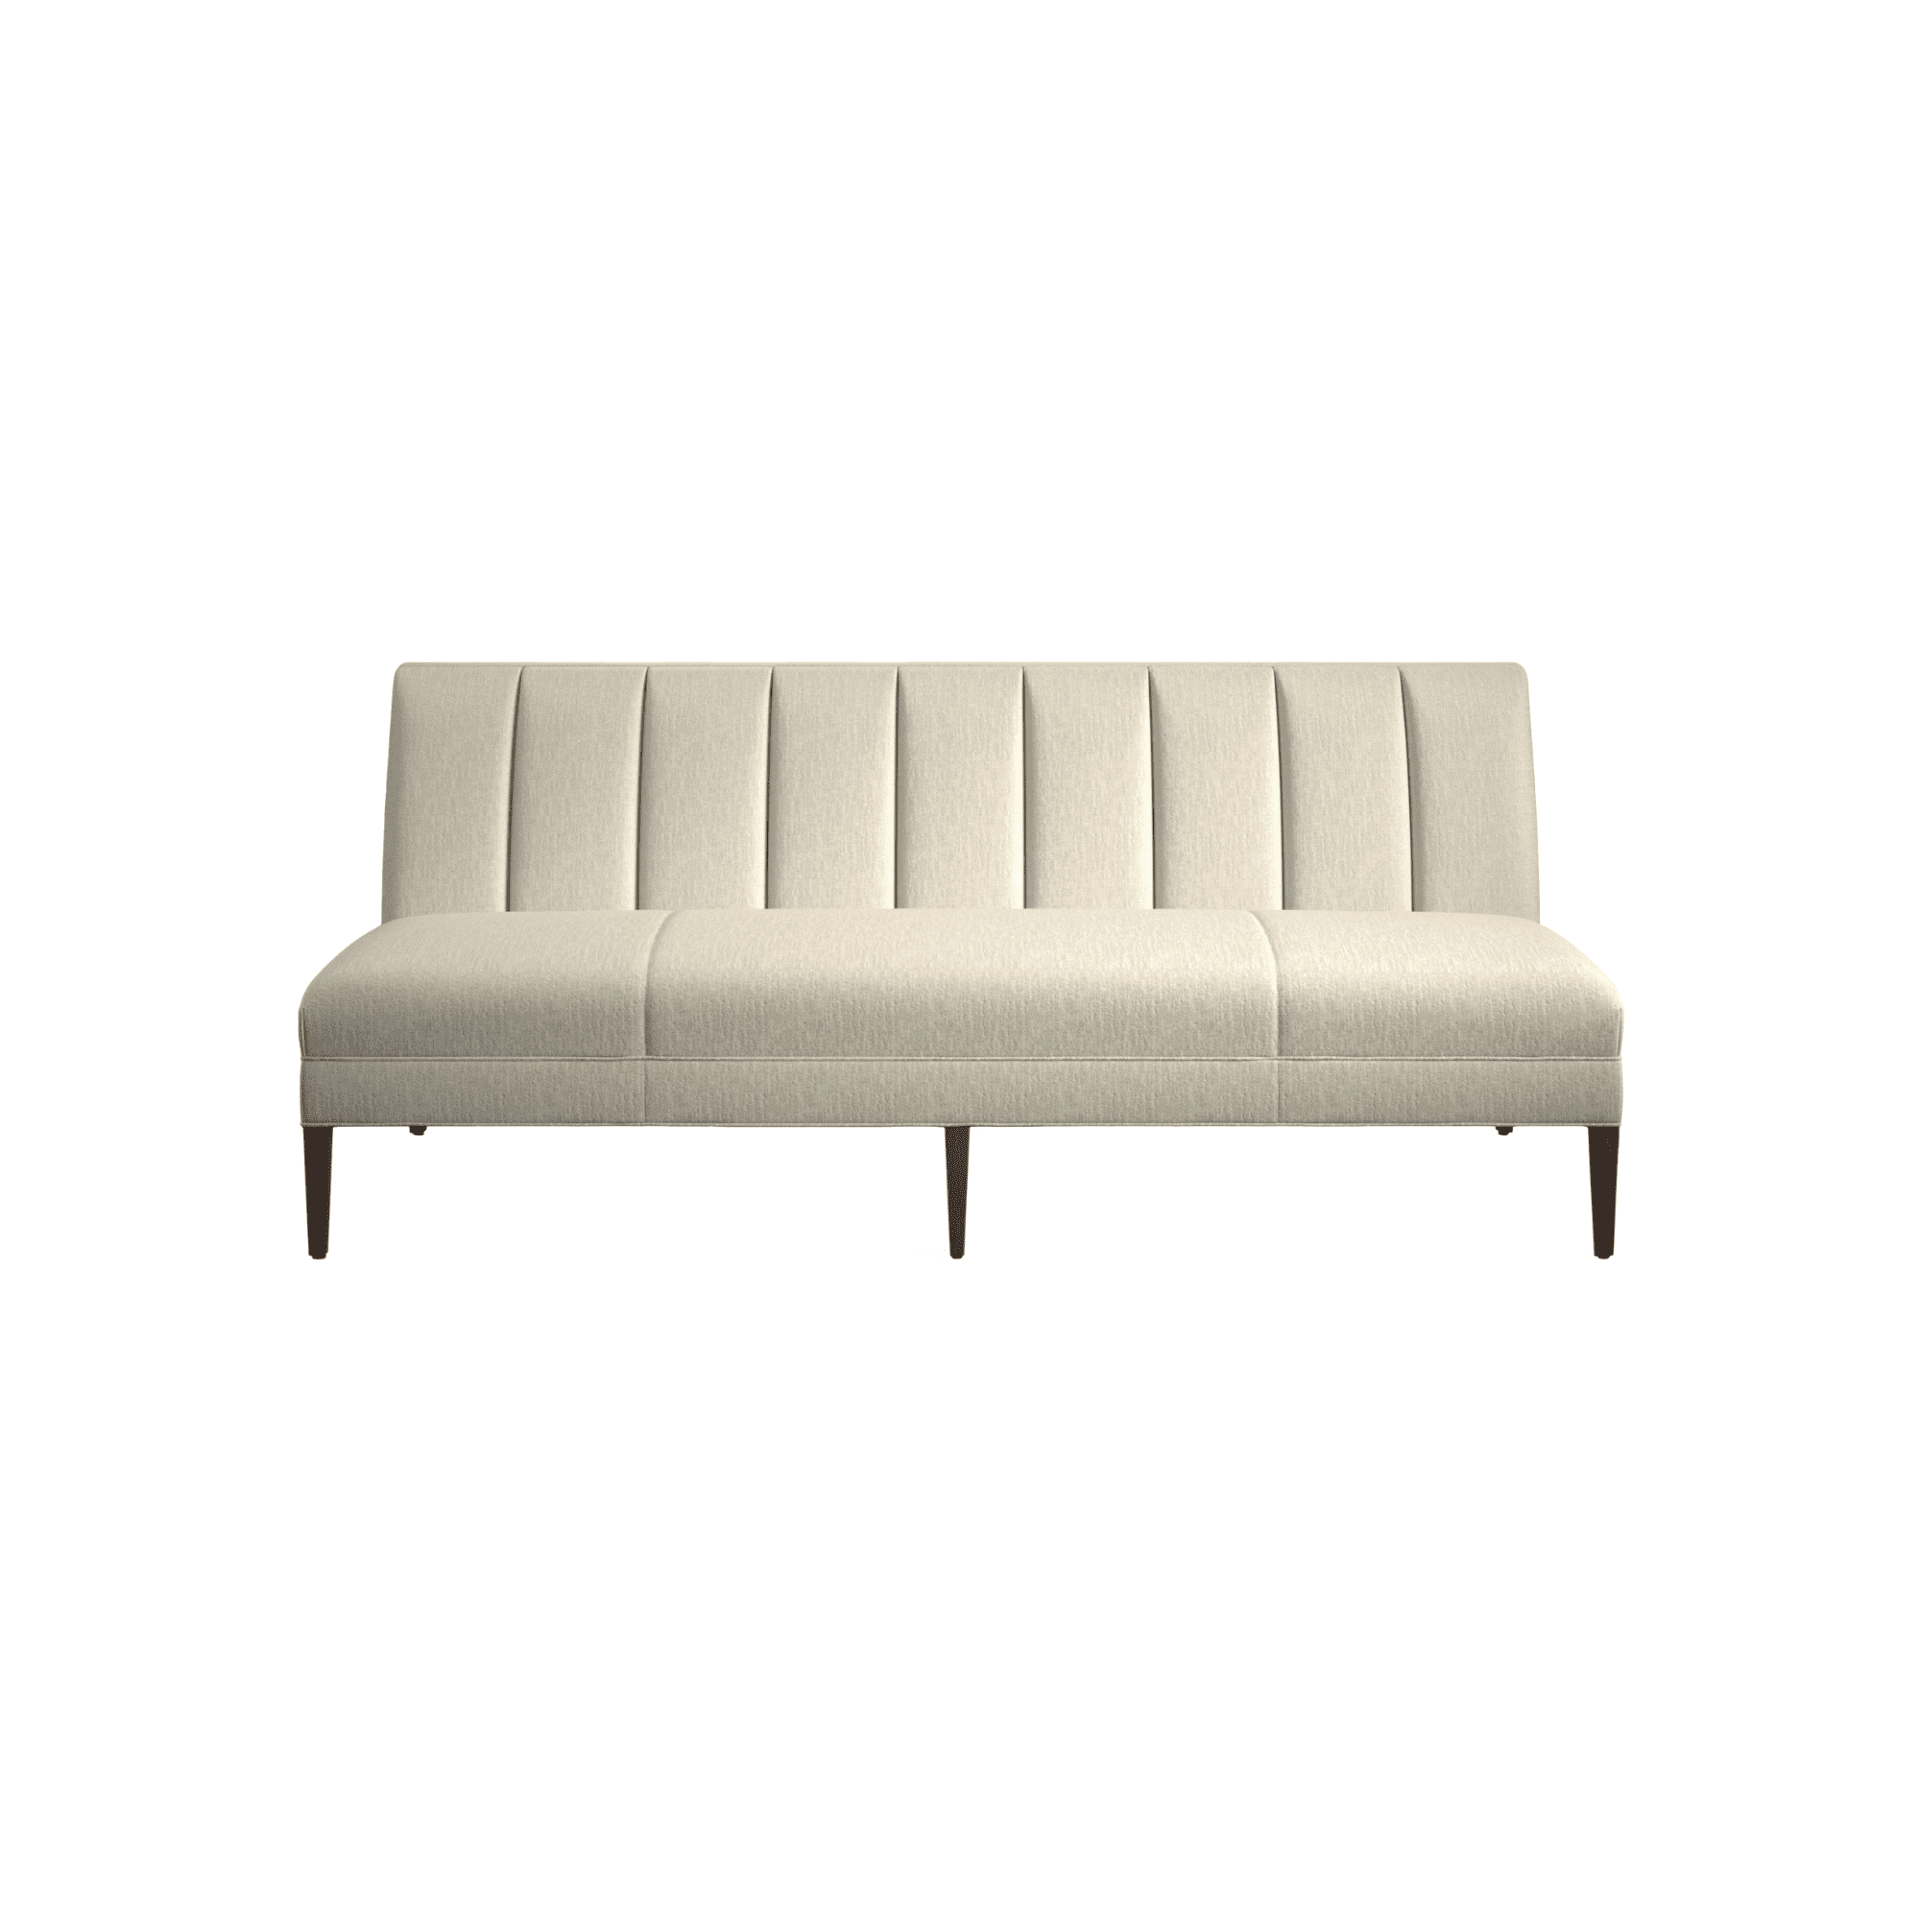 BOWERY Upholstered Banquette, Luxury Furniture - Blend Home Furnishings